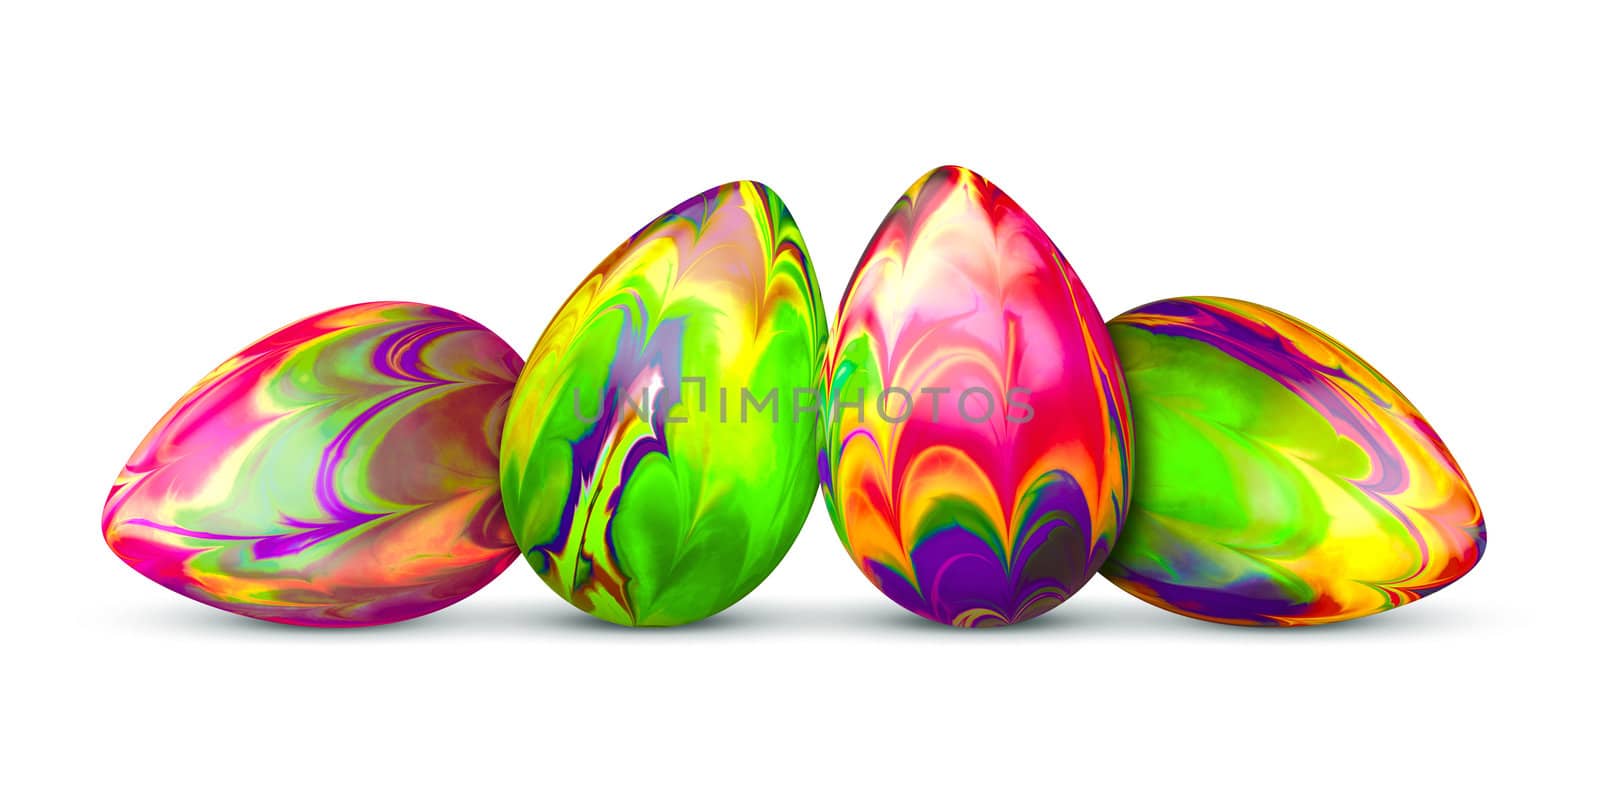 An image of four colorful easter eggs